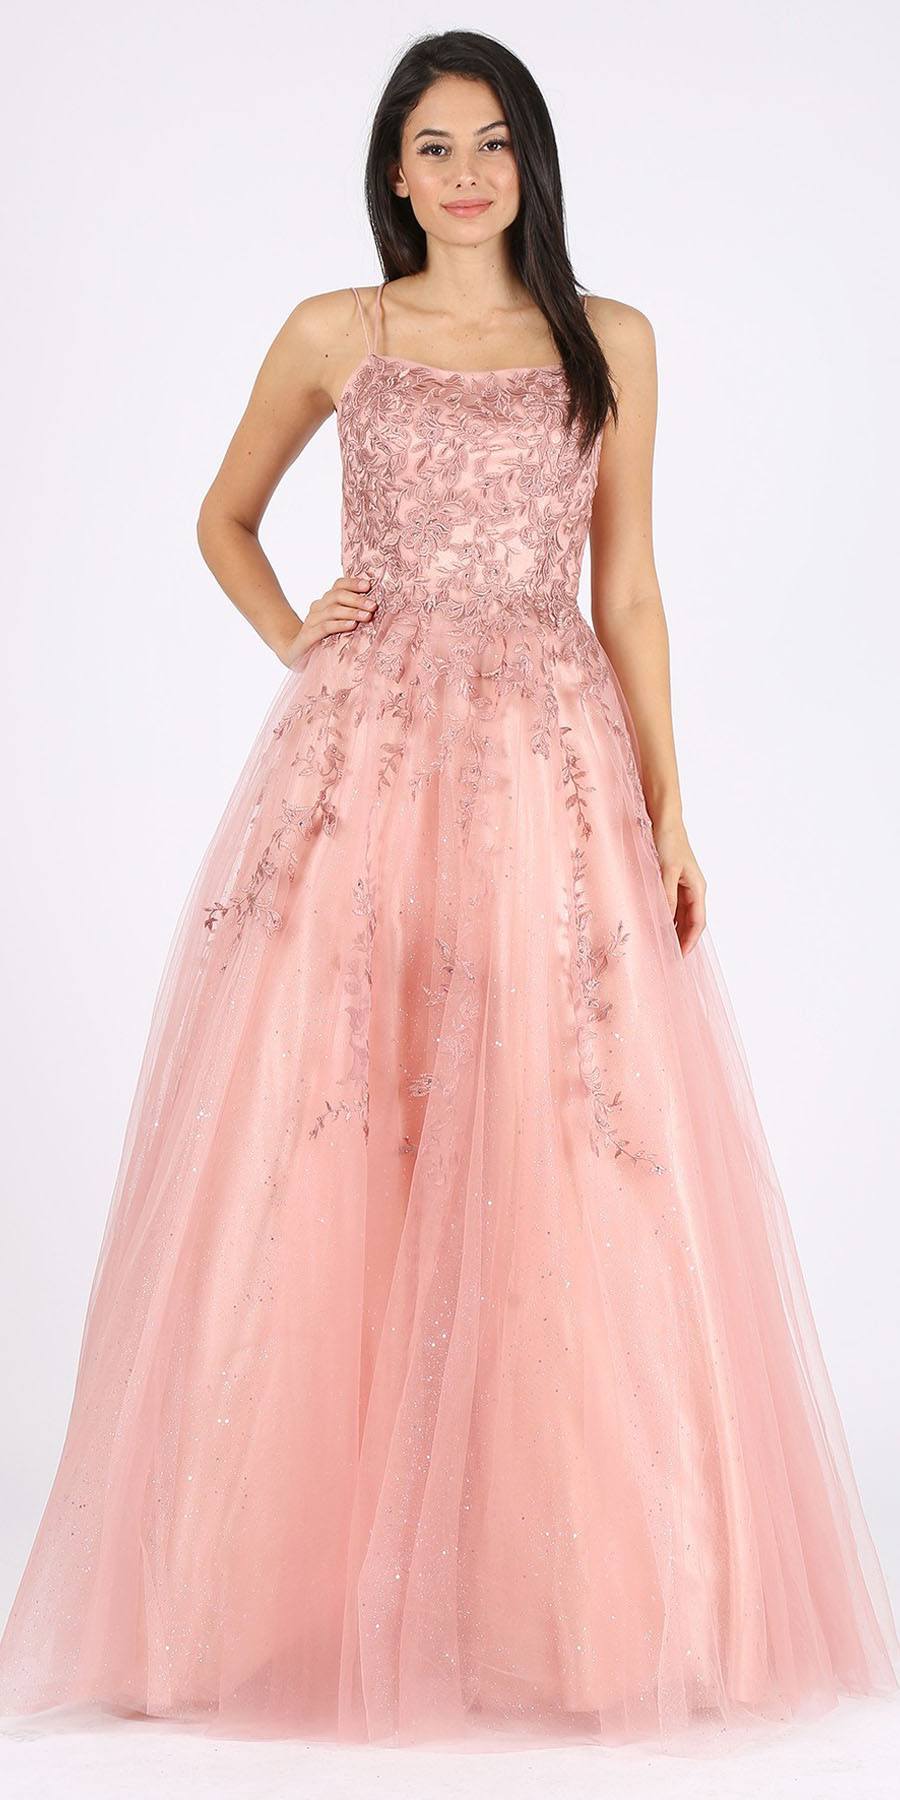 Eureka Fashion 9757 Appliqued Dusty Rose Prom Ball Gown Lace-Up Back